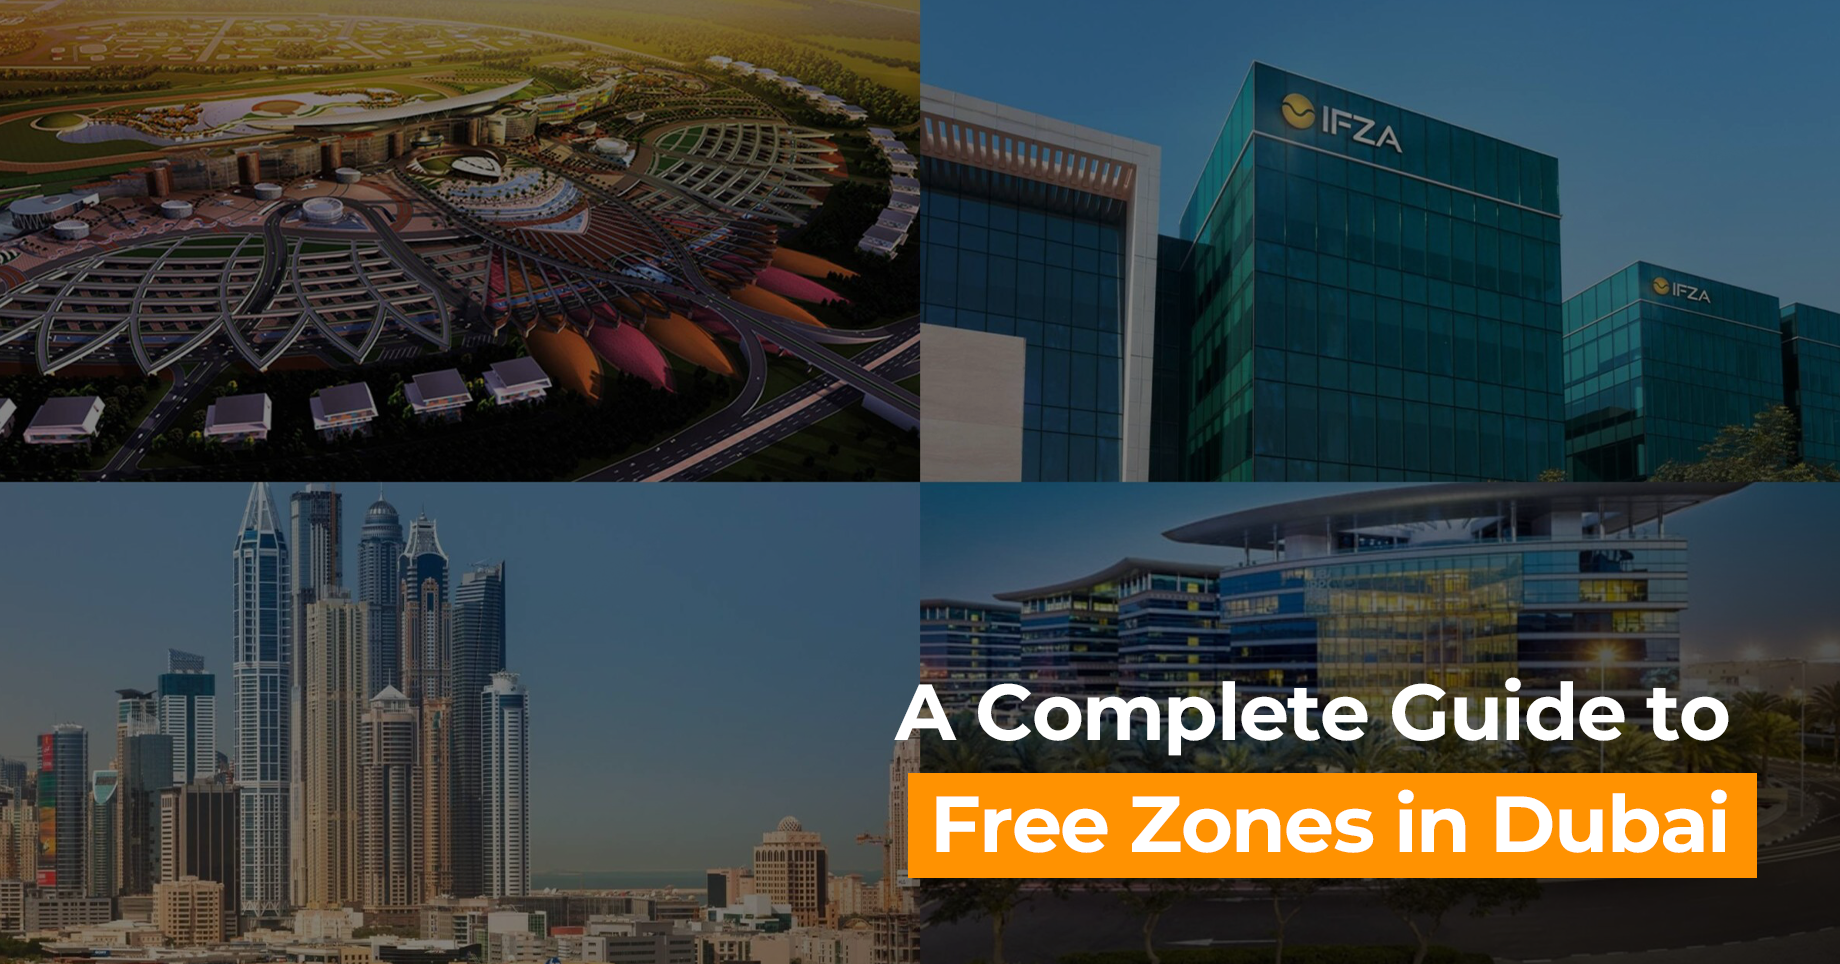 A Complete Guide to Free Zones in Dubai